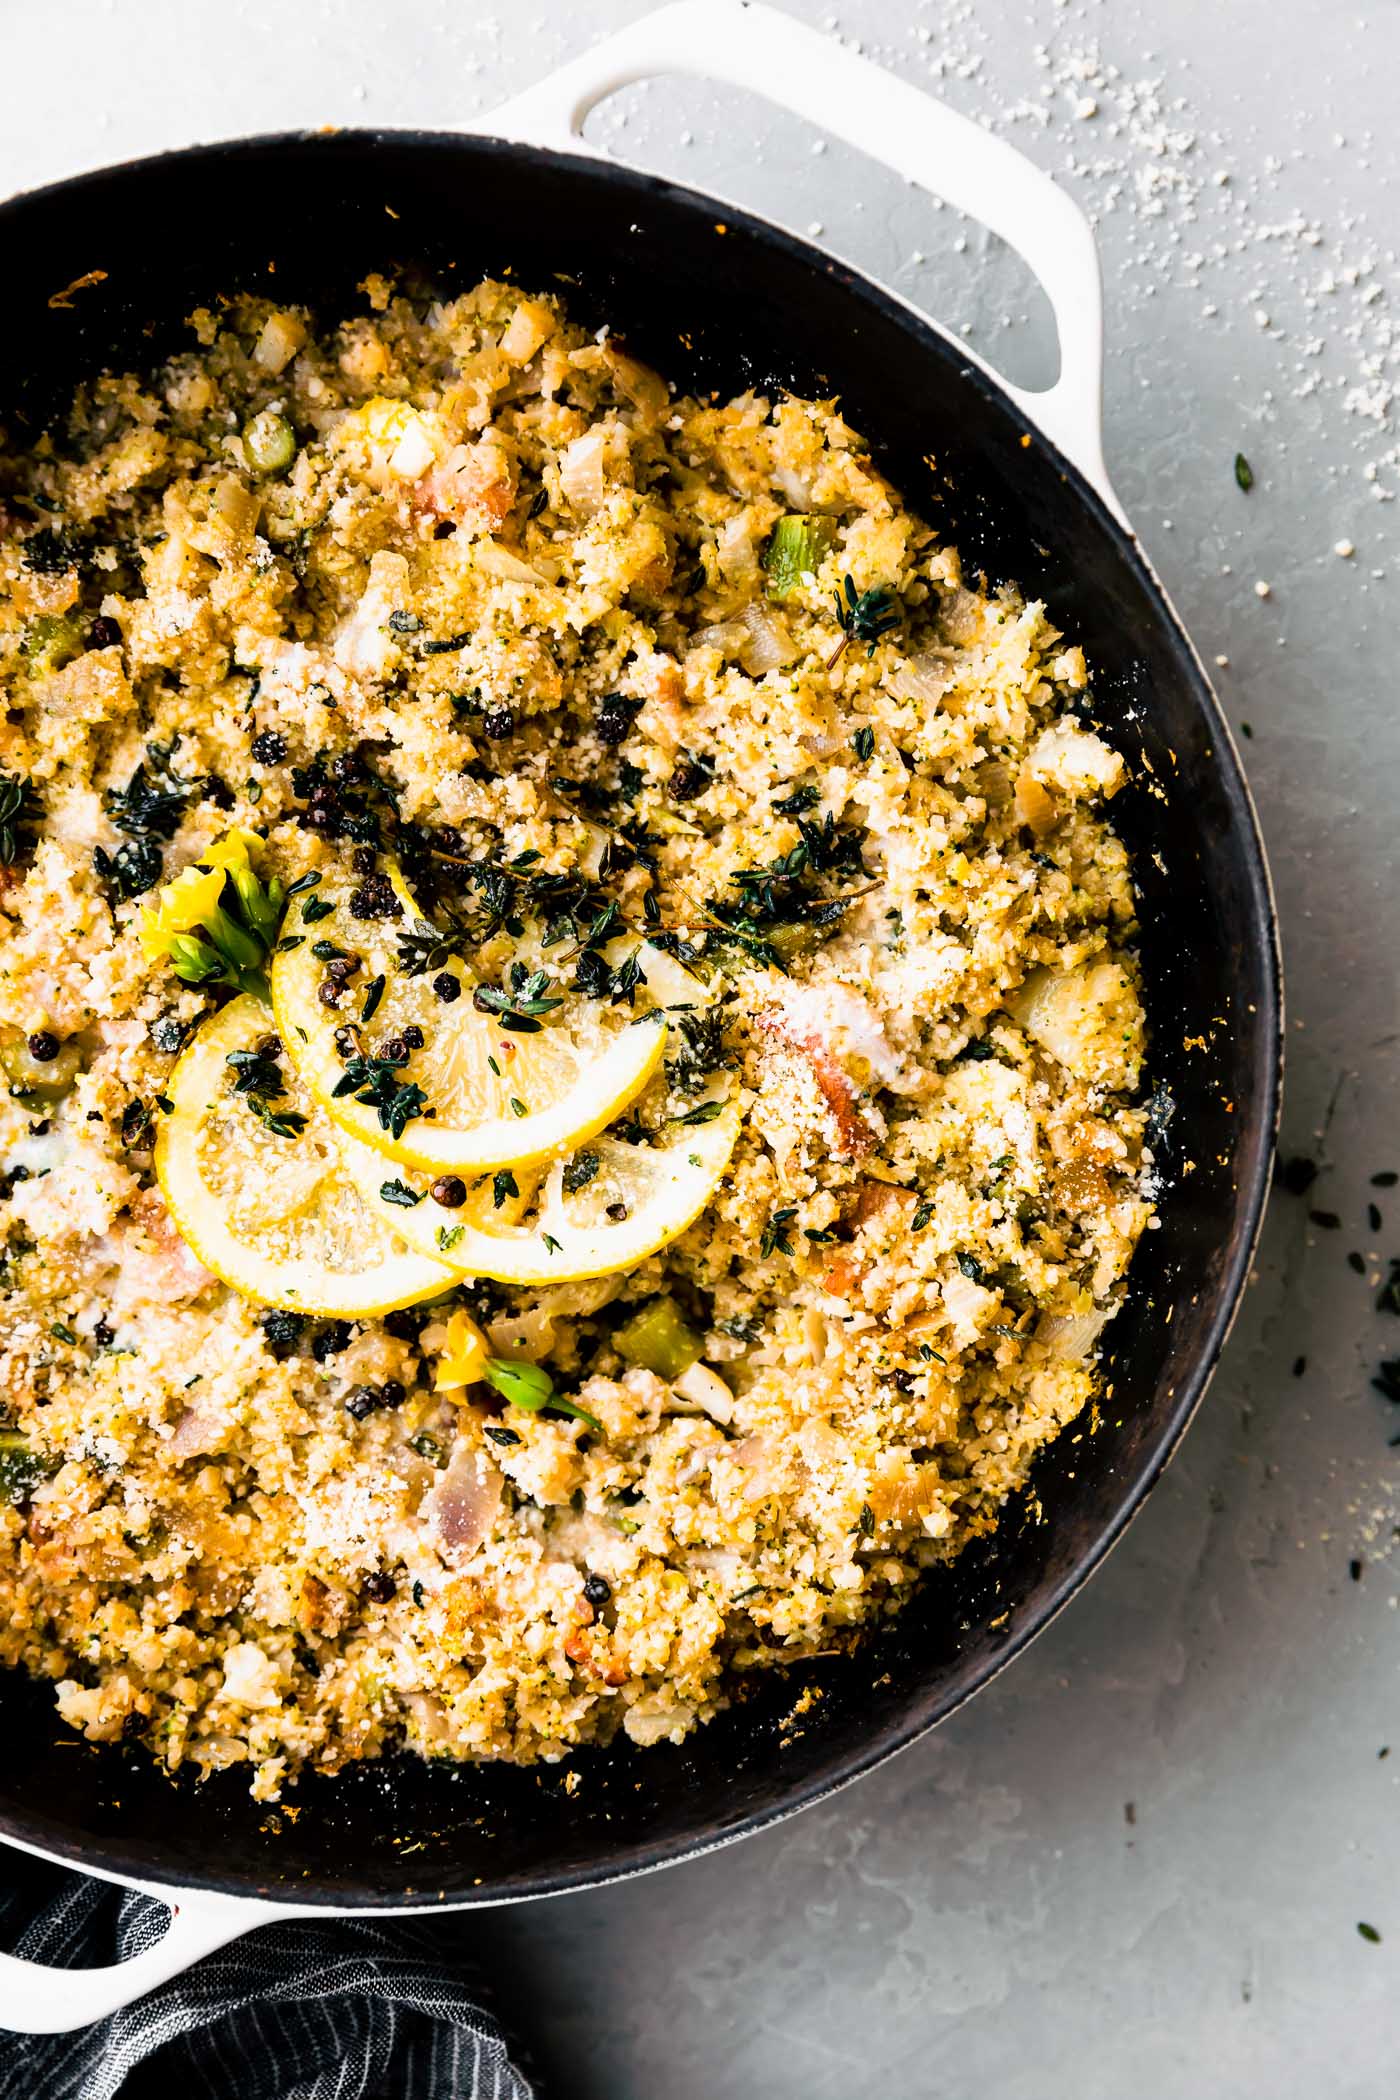 skillet of baked riced broccoli and cauliflower casserole